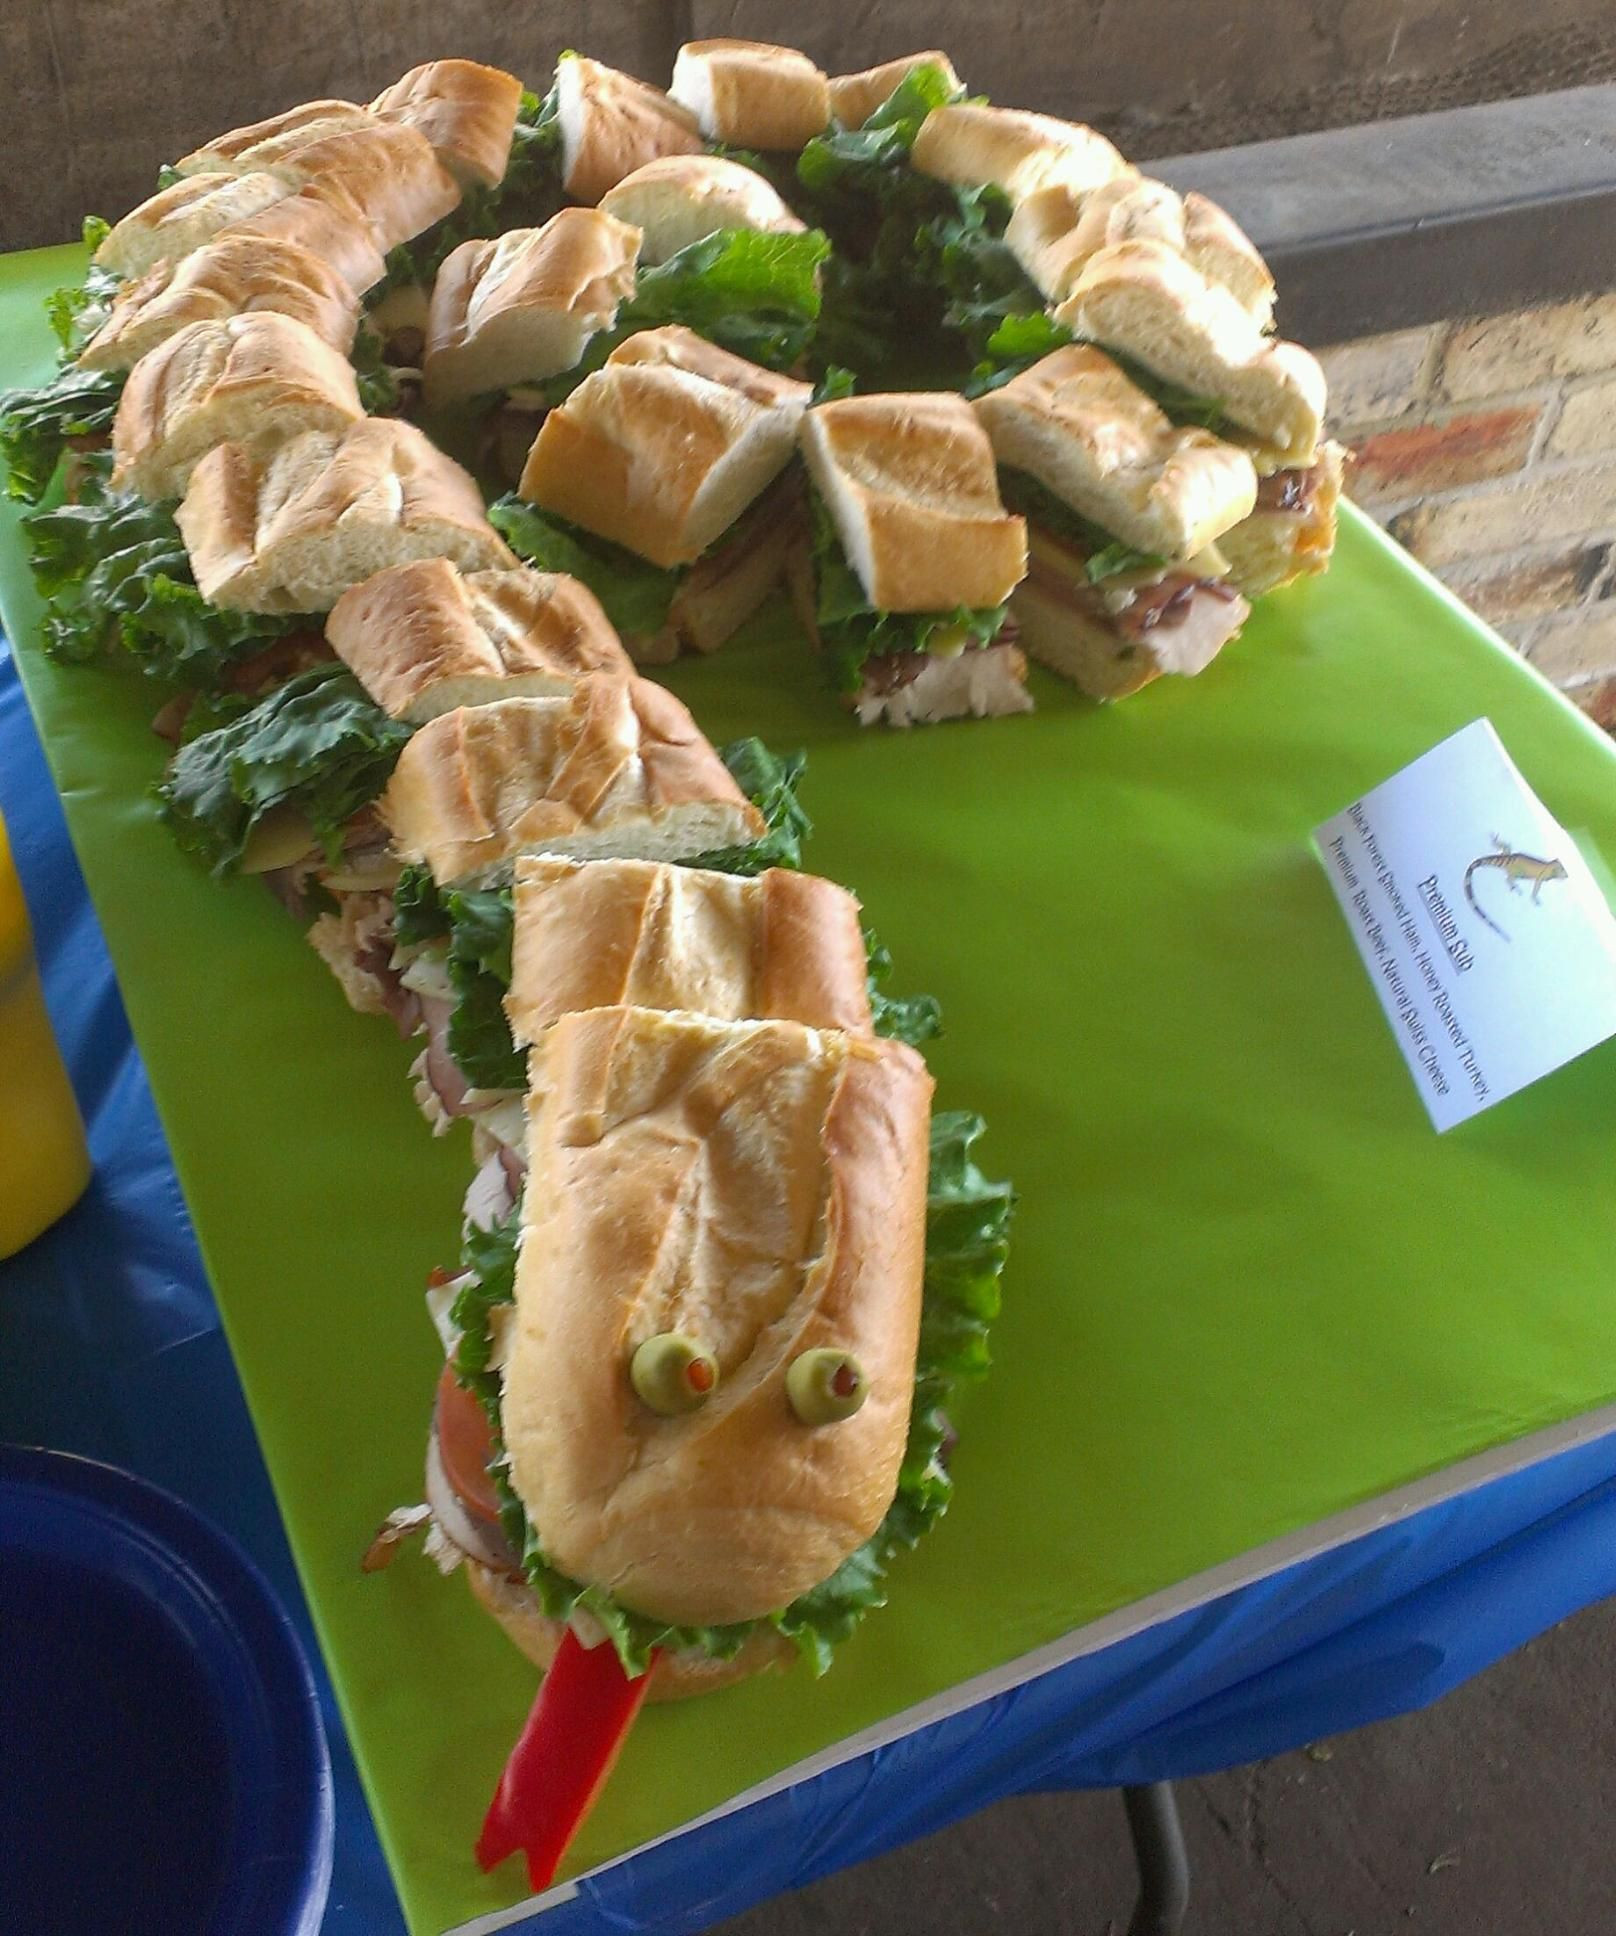 Reptile Party Food Ideas
 Snake sandwich for a reptile party